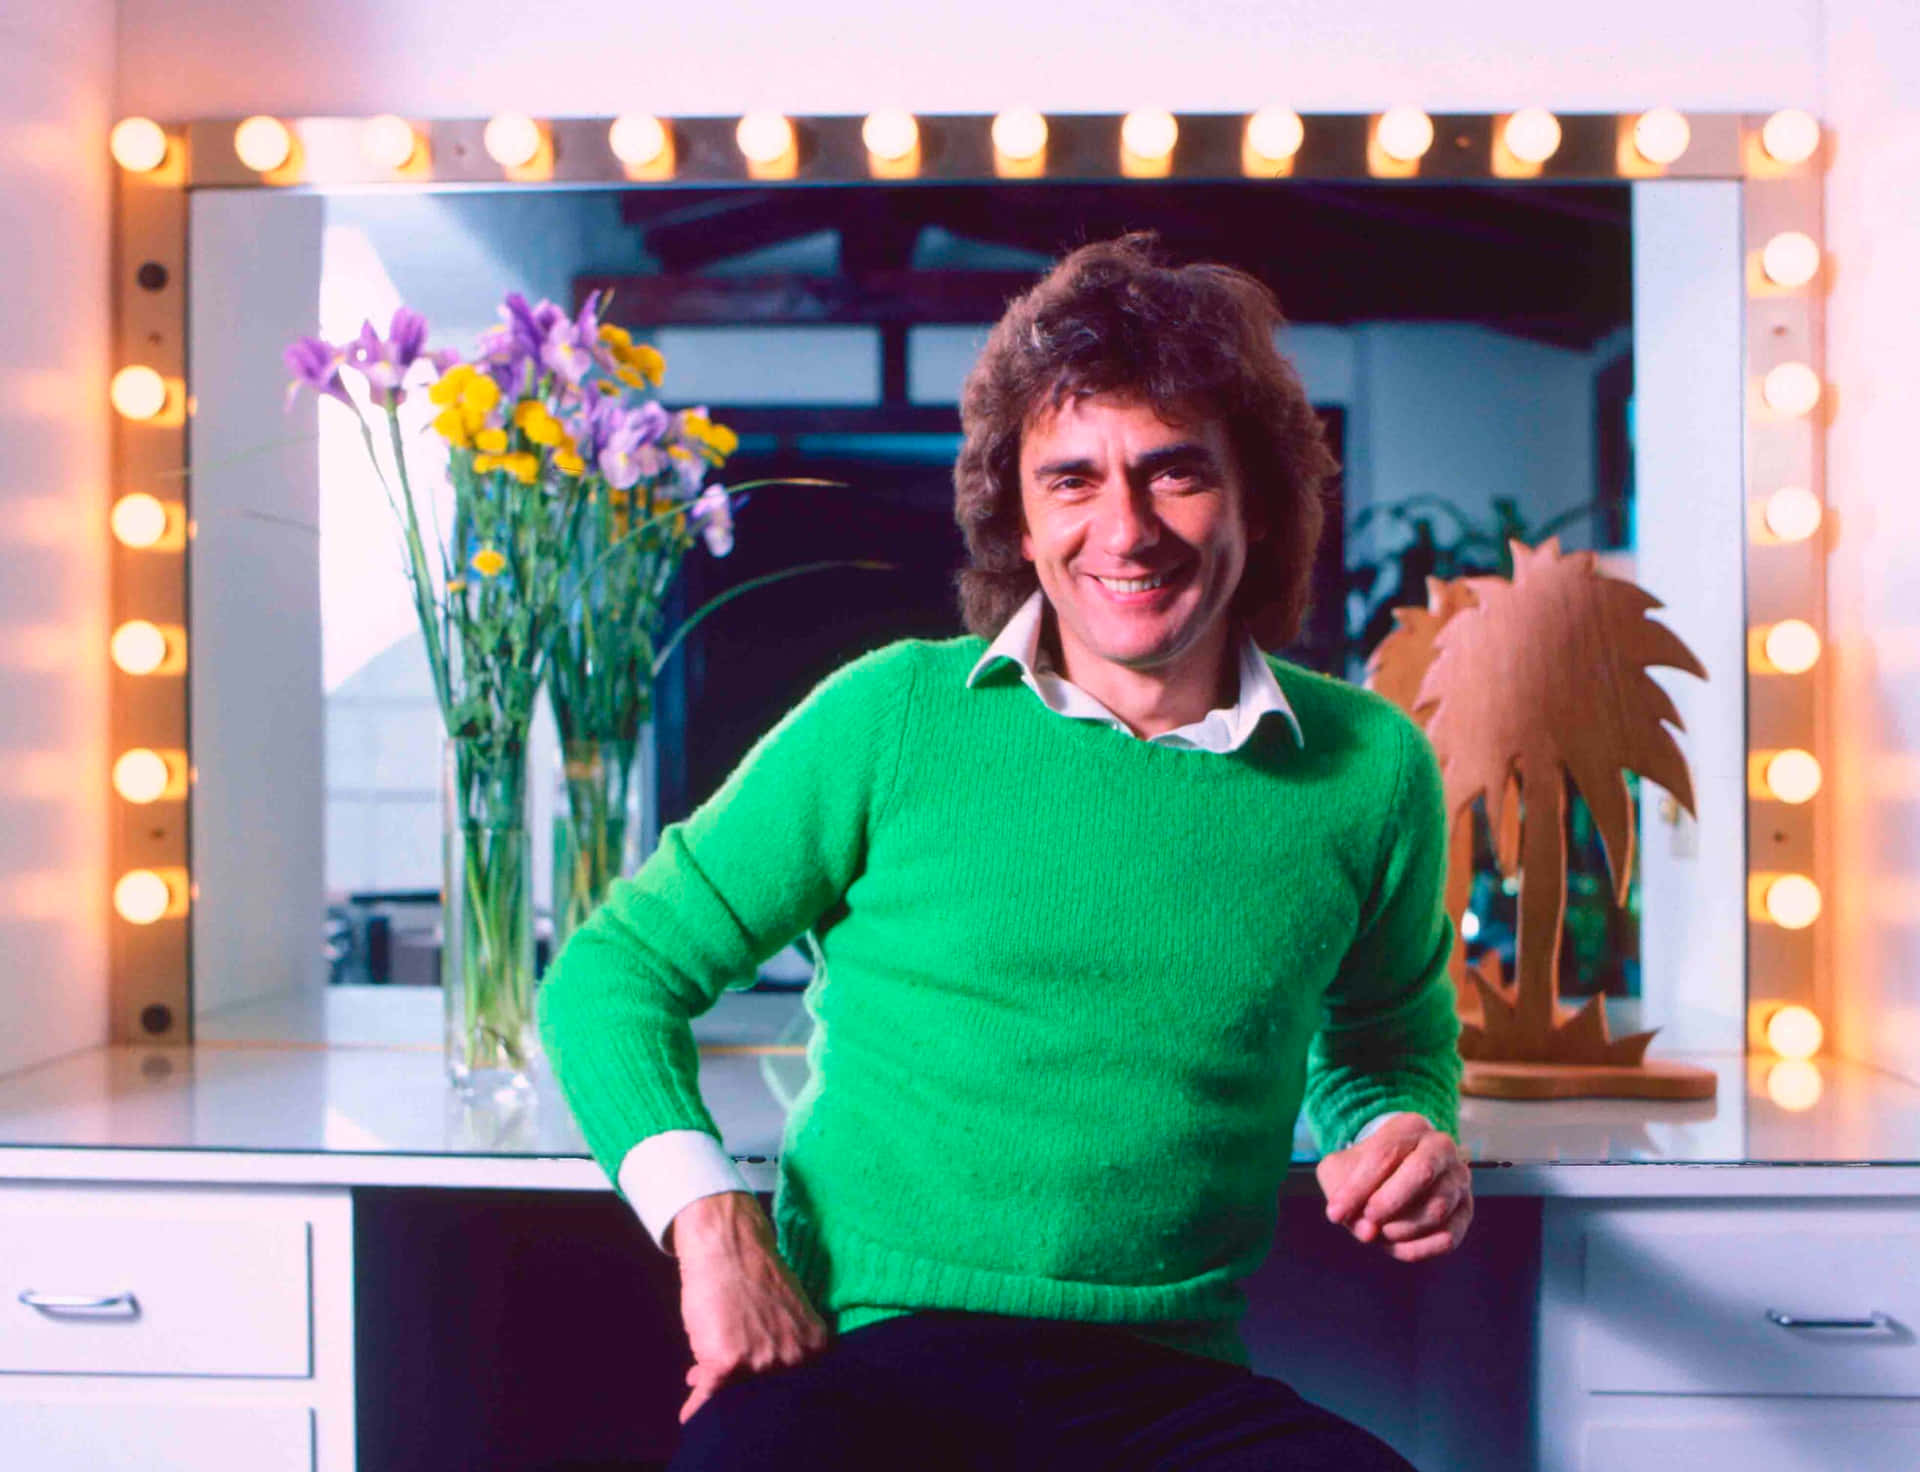 Caption: "Dudley Moore - Legendary British Actor, Musician and Comedian." Wallpaper